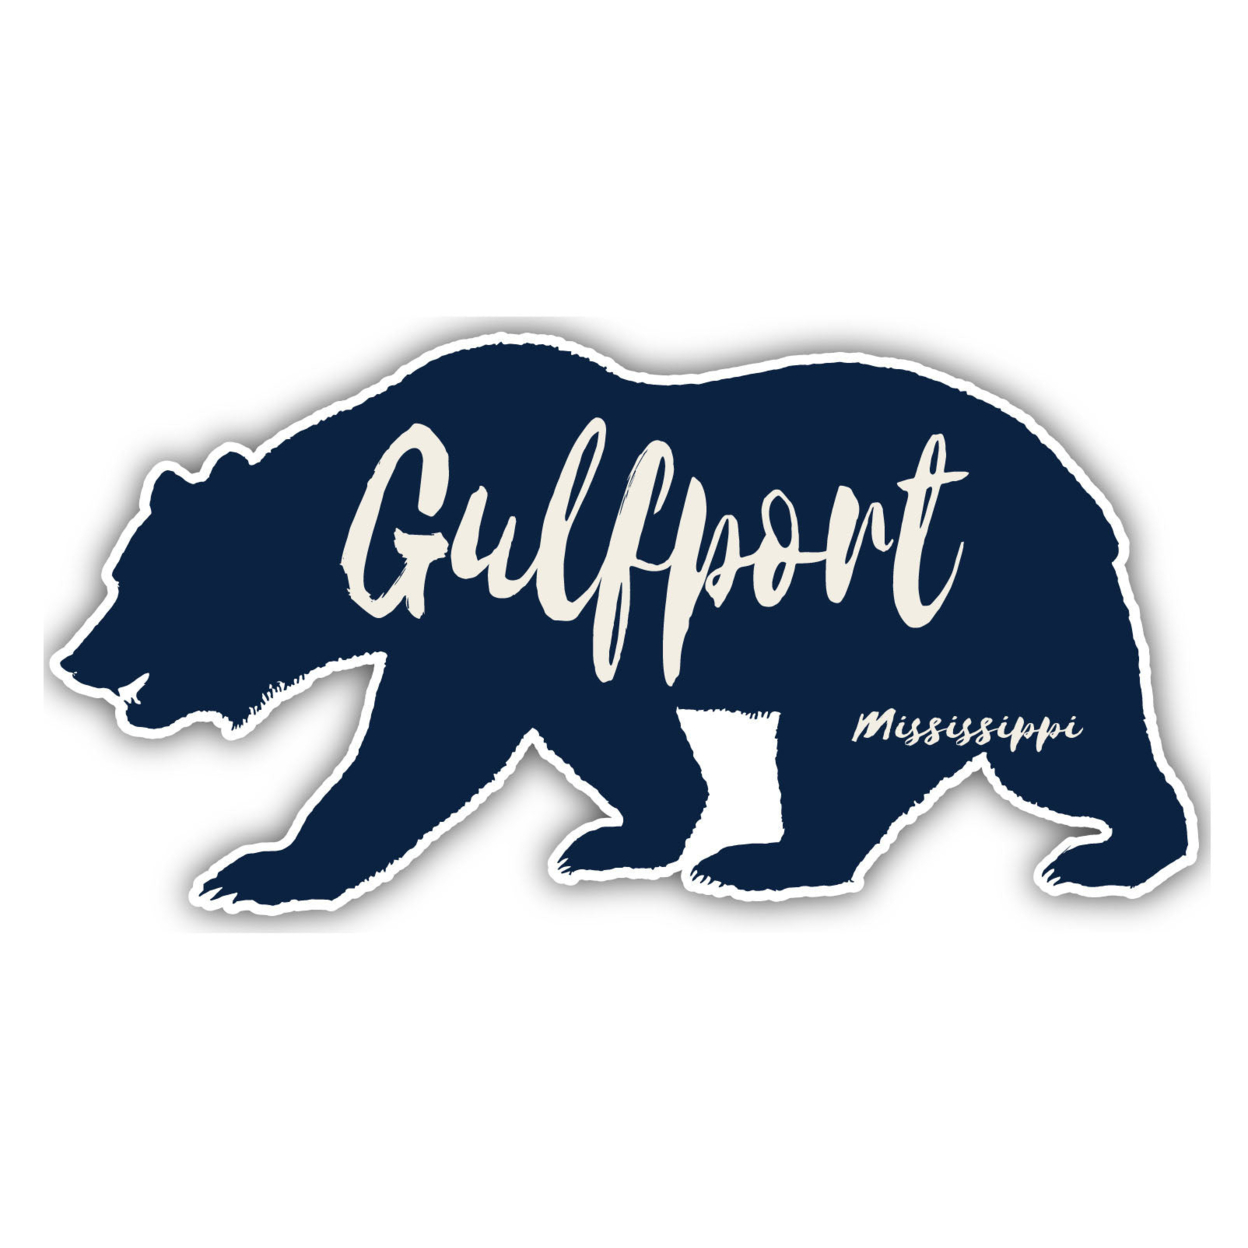 Gulfport Mississippi Souvenir Decorative Stickers (Choose Theme And Size) - Single Unit, 12-Inch, Bear